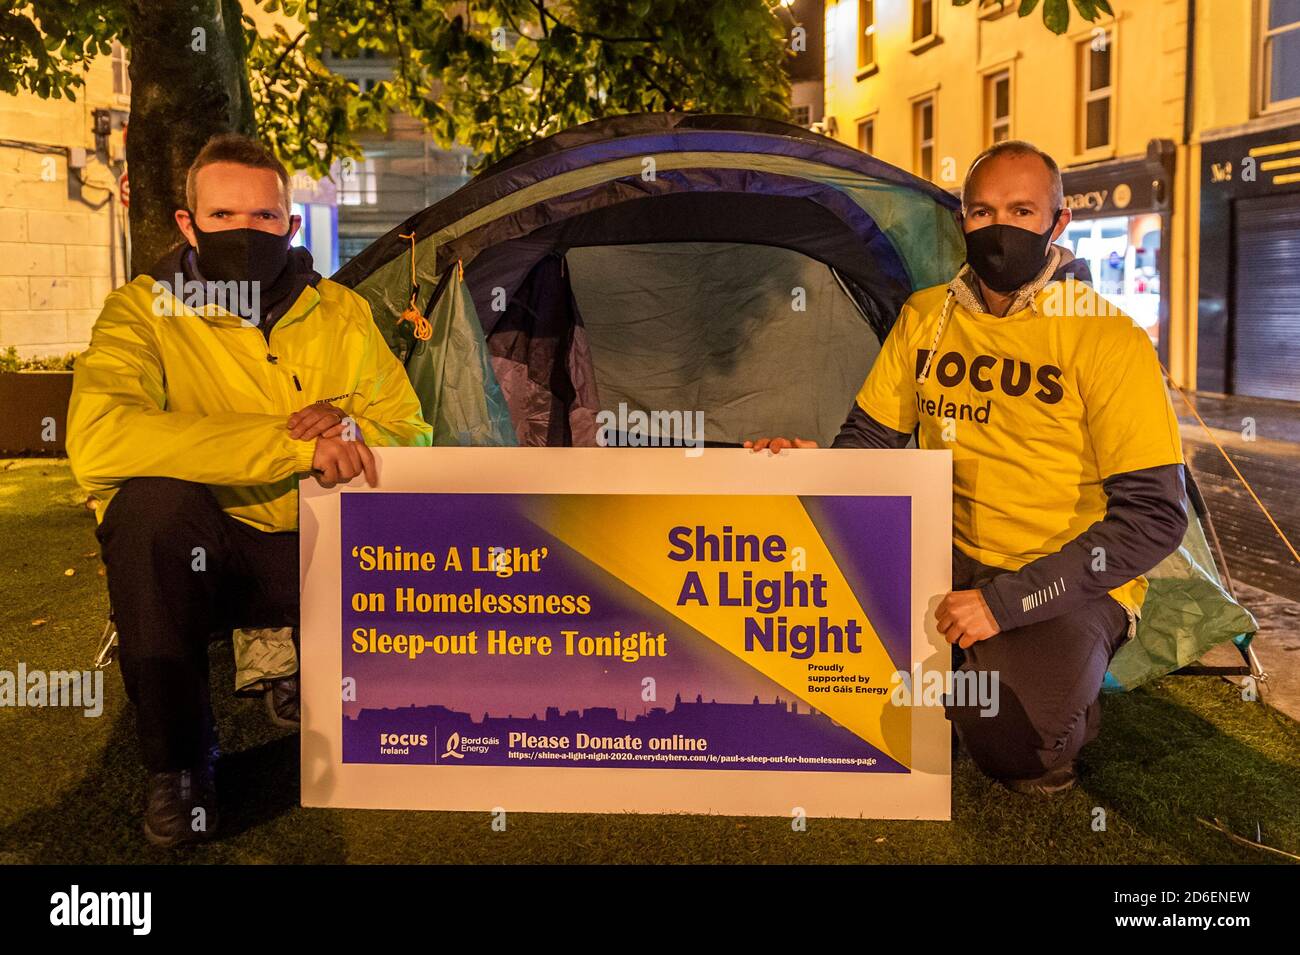 Clonakilty, West Cork, Ireland. 16th Oct, 2020. The annual Focus Ireland 'Shine A Light' sleep out in aid of homeless people is taking place virtually this year. Cllr. Paul Hayes and his brother Kevin are spending the night in a tent in Astna Square, Clonakilty. Paul and his brother will be sleeping out until 7am on Saturday morning and hope to have a full bucket of donations. Credit: AG News/Alamy Live News Stock Photo